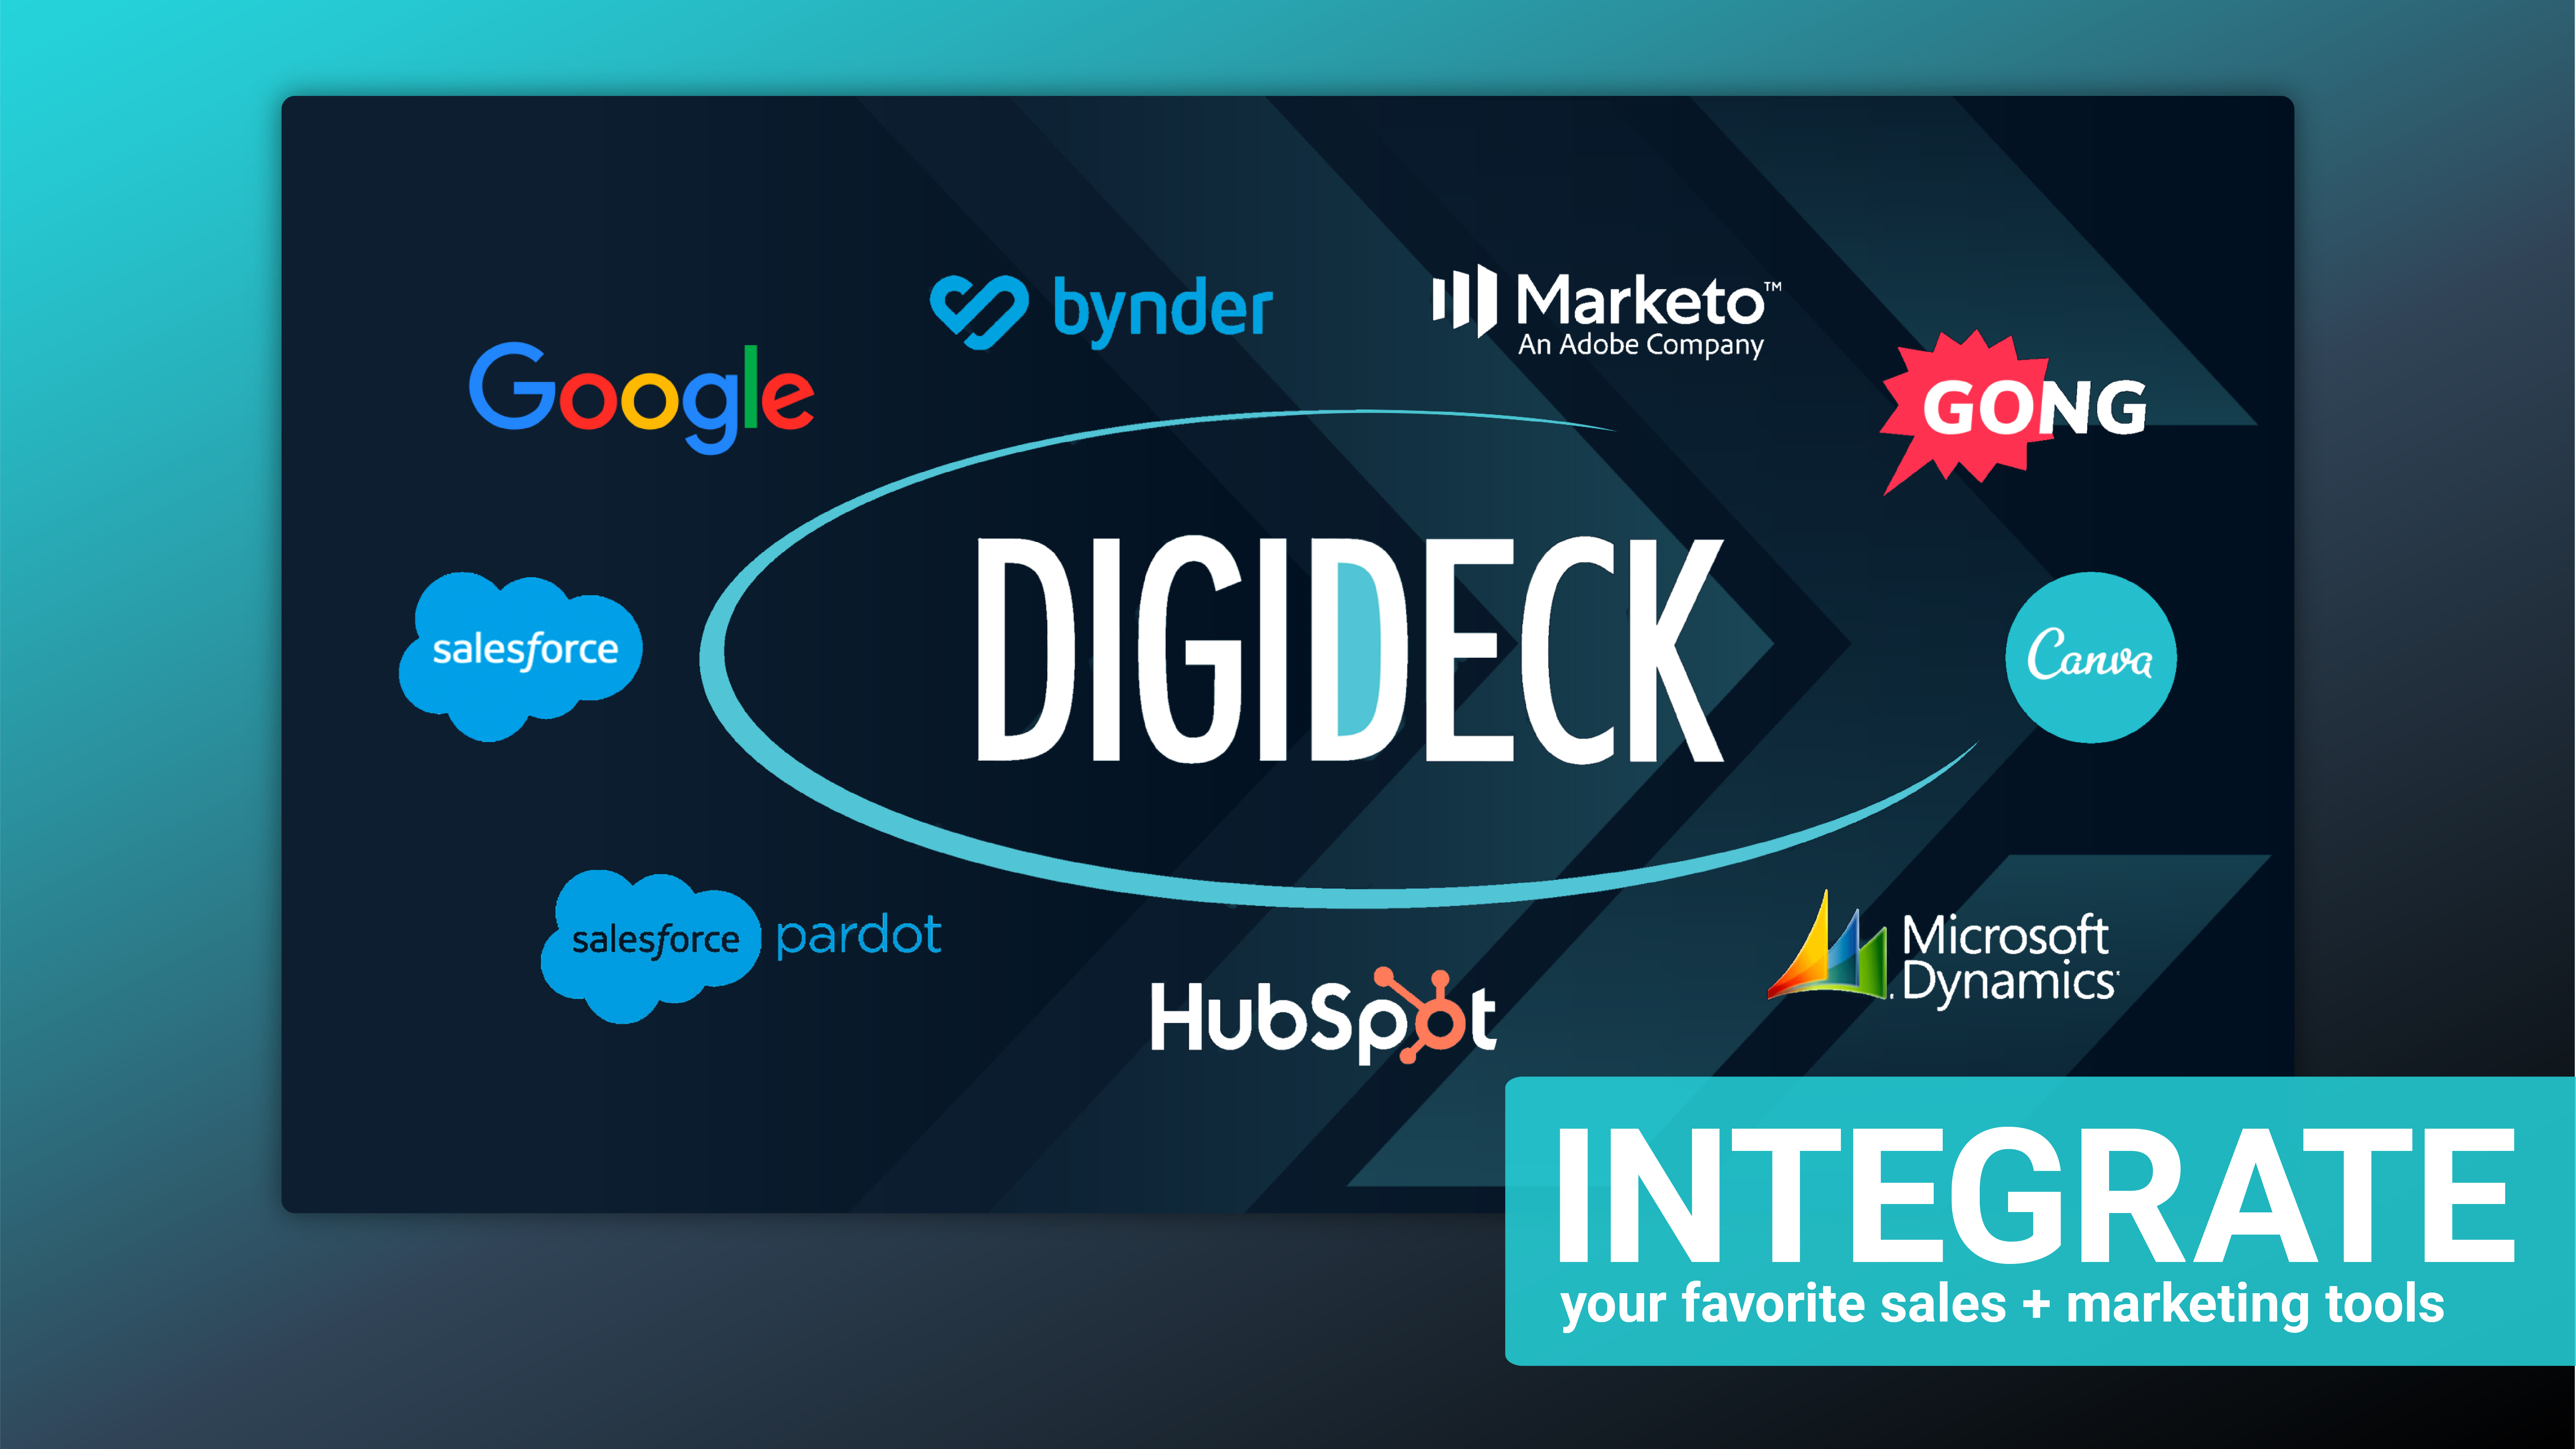 Built for any and every B2B or Enterprise Business organization, our platform integrates with all your favorite + most-used tools for an enhanced user experience.